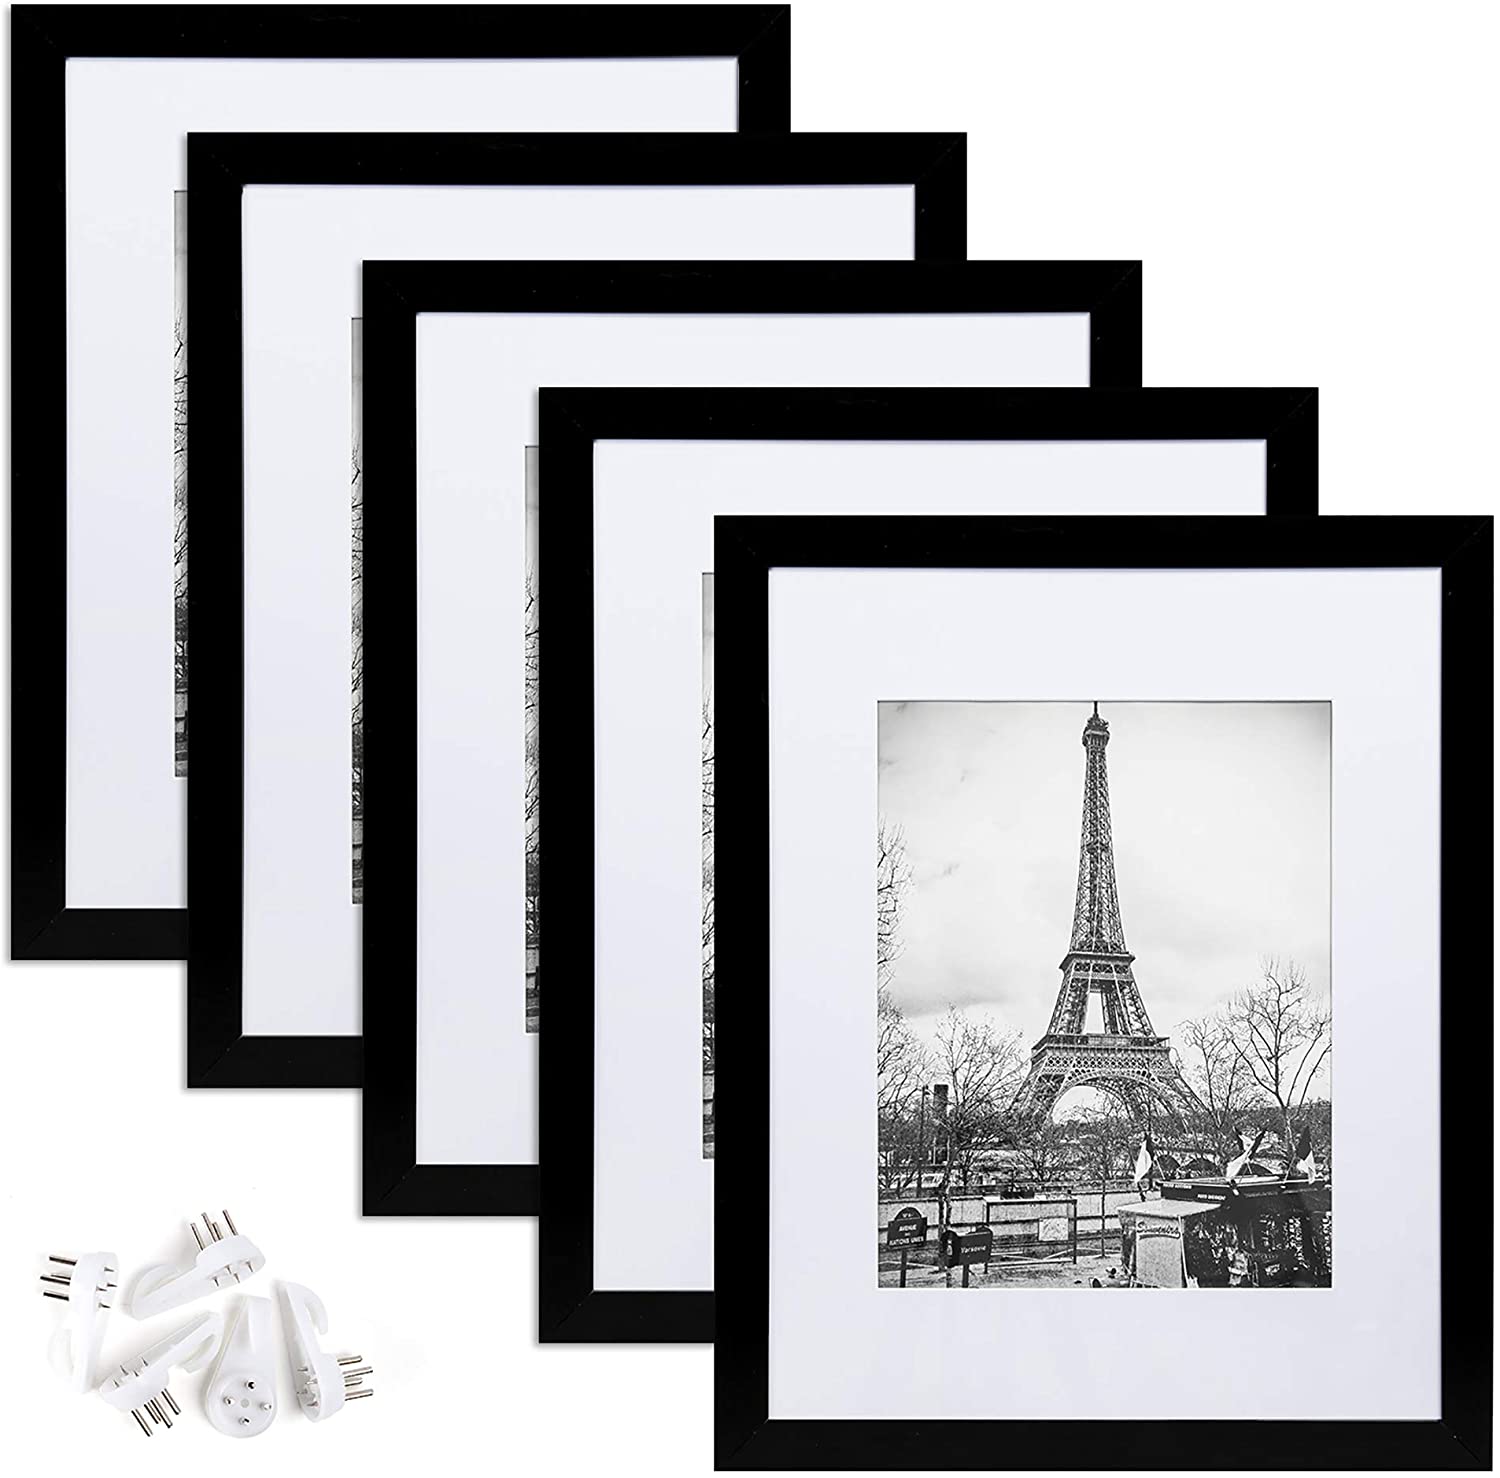 upsimples 11x14 Picture Frame Set of 5,Display Pictures 8x10 with Mat –  Upsimples Direct